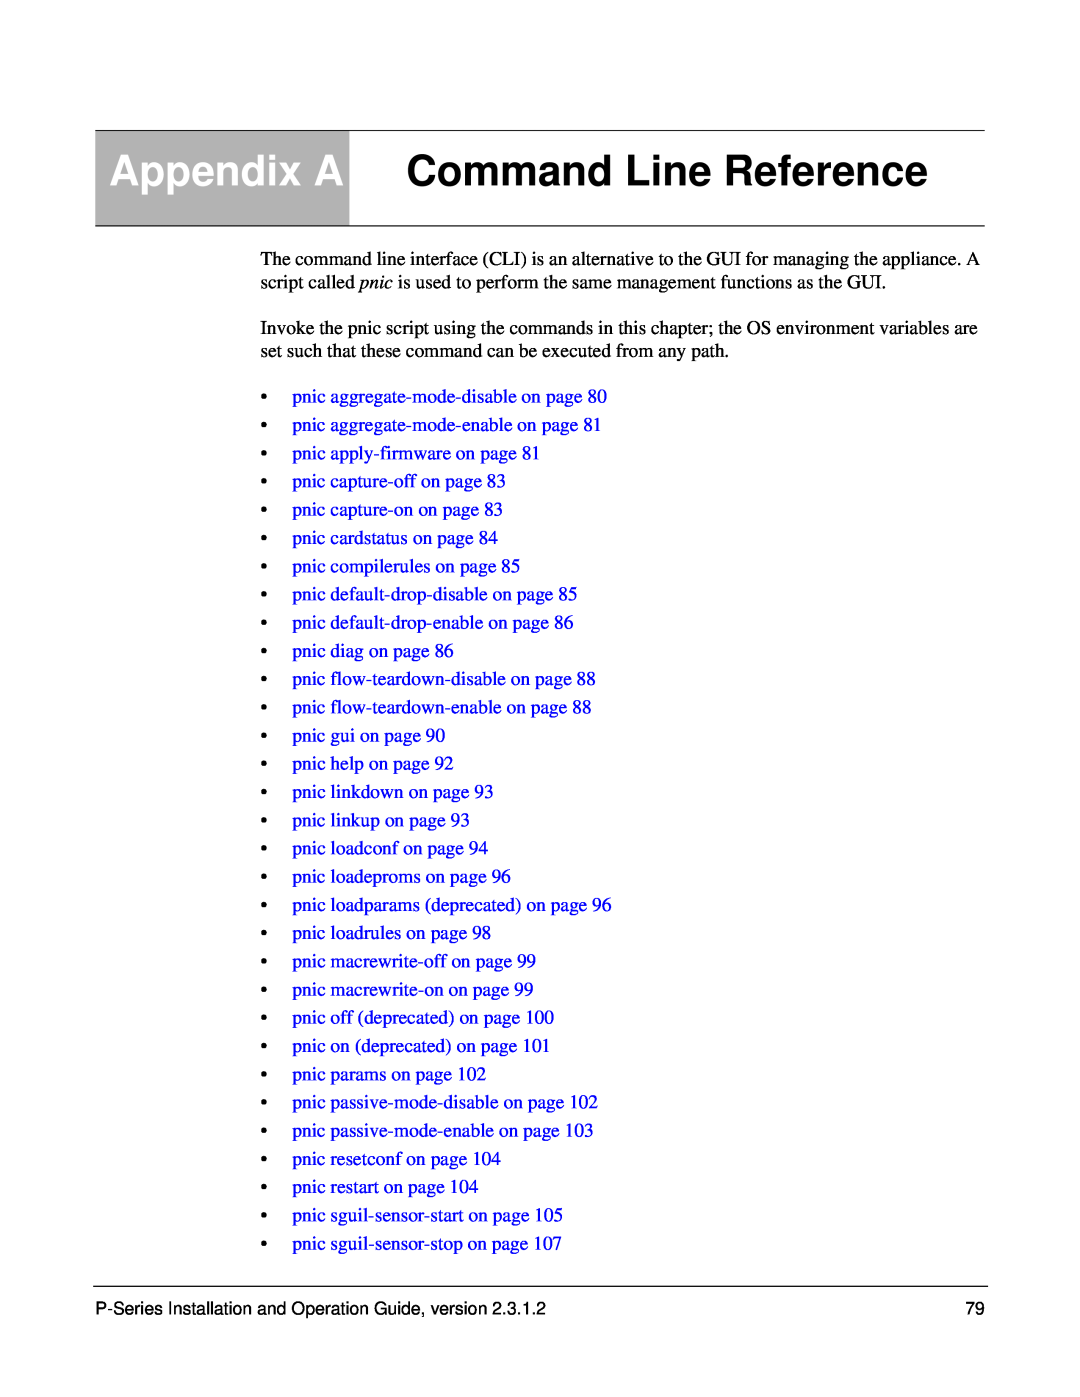 Force10 Networks 100-00055-01 manual Appendix A Command Line Reference, pnic aggregate-mode-disable on page 